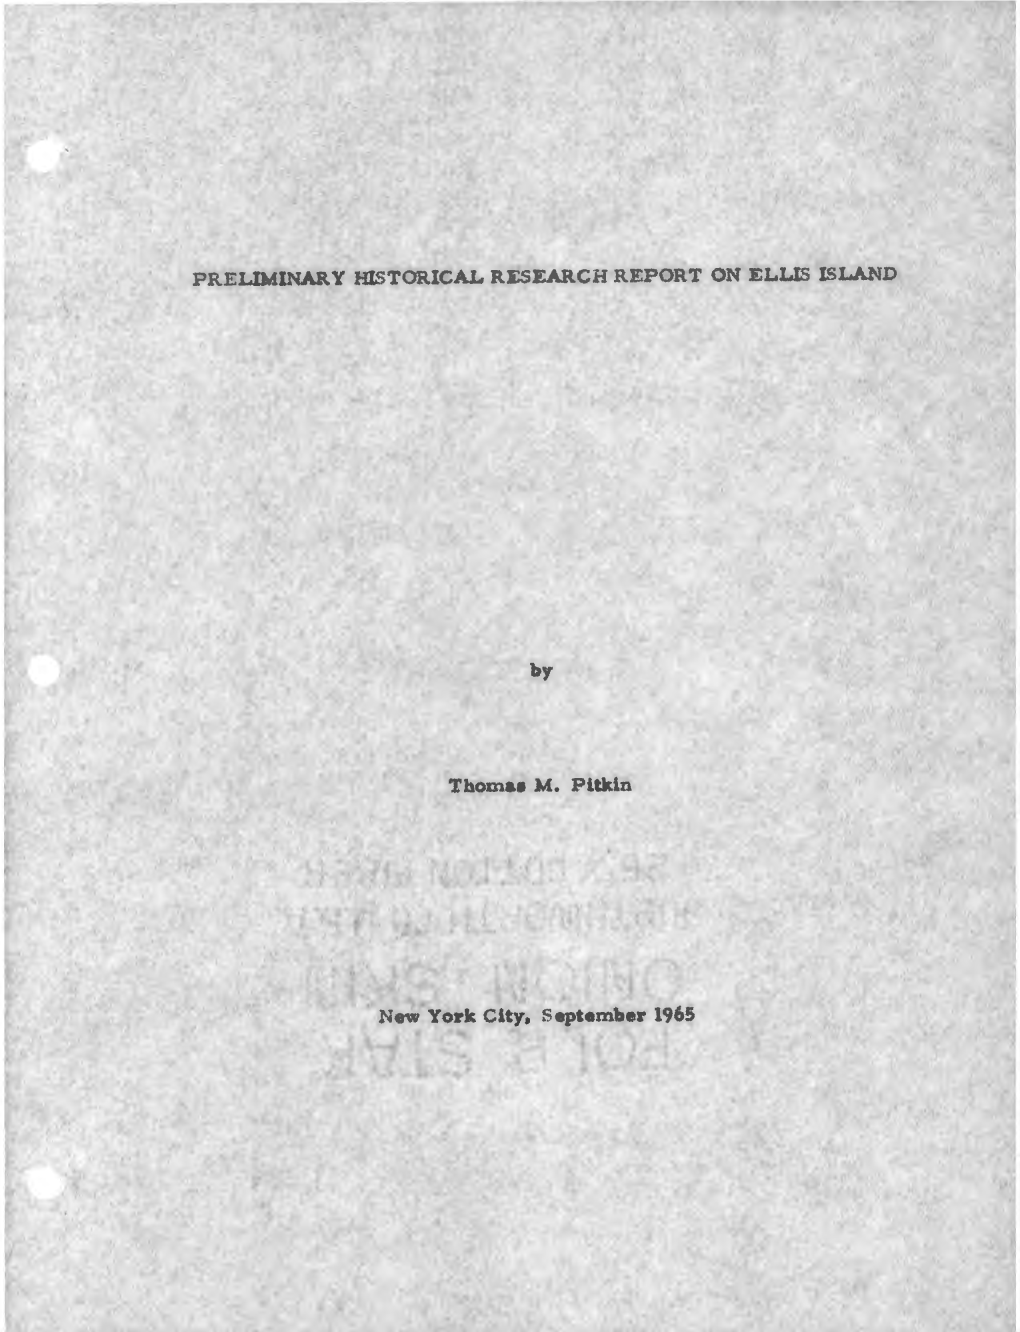 PRELIMINARY HISTORICAL RESEARCH REPORT on ELLIS ISLAND by Thomas M. Pitkin New York City, September 1965